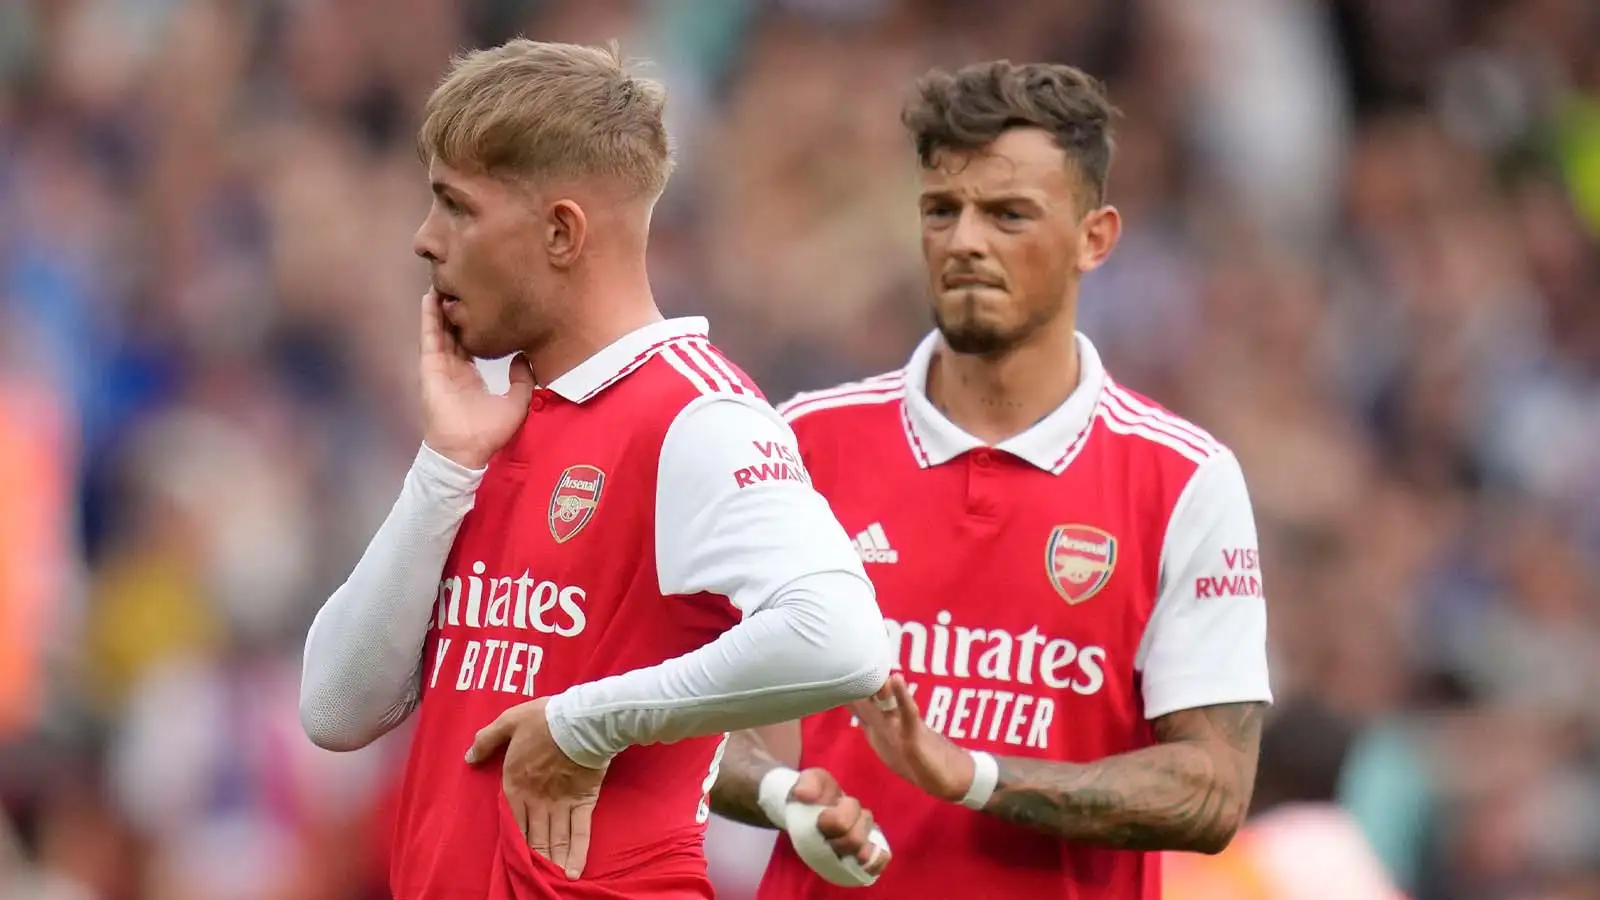 Arsenal's Emile Smith Rowe, left, reacts